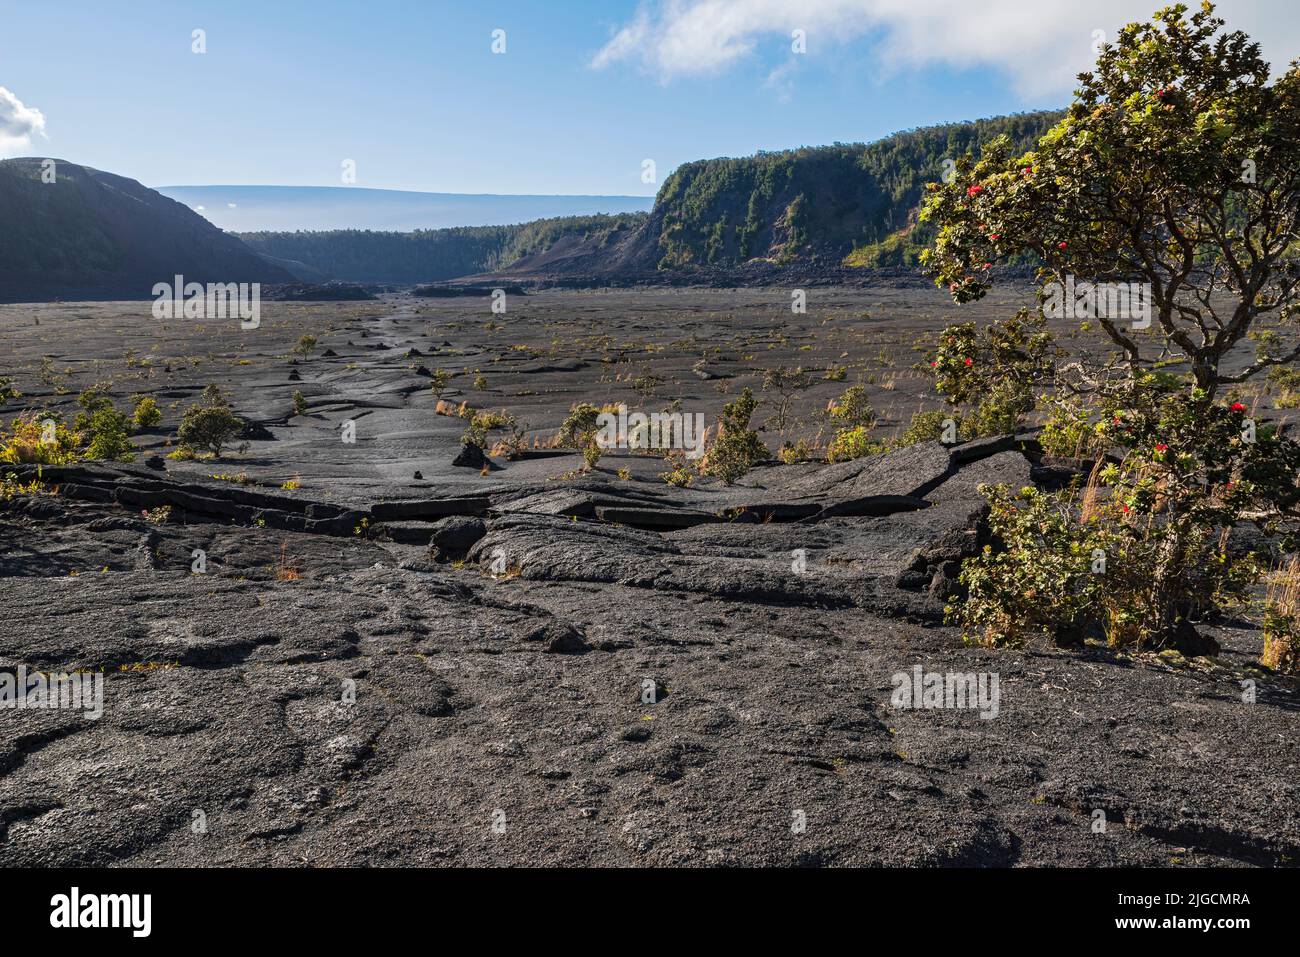 floor of dry lava bed and vegetation at kilauea iki crater in hawaii volcanoes national park Stock Photo